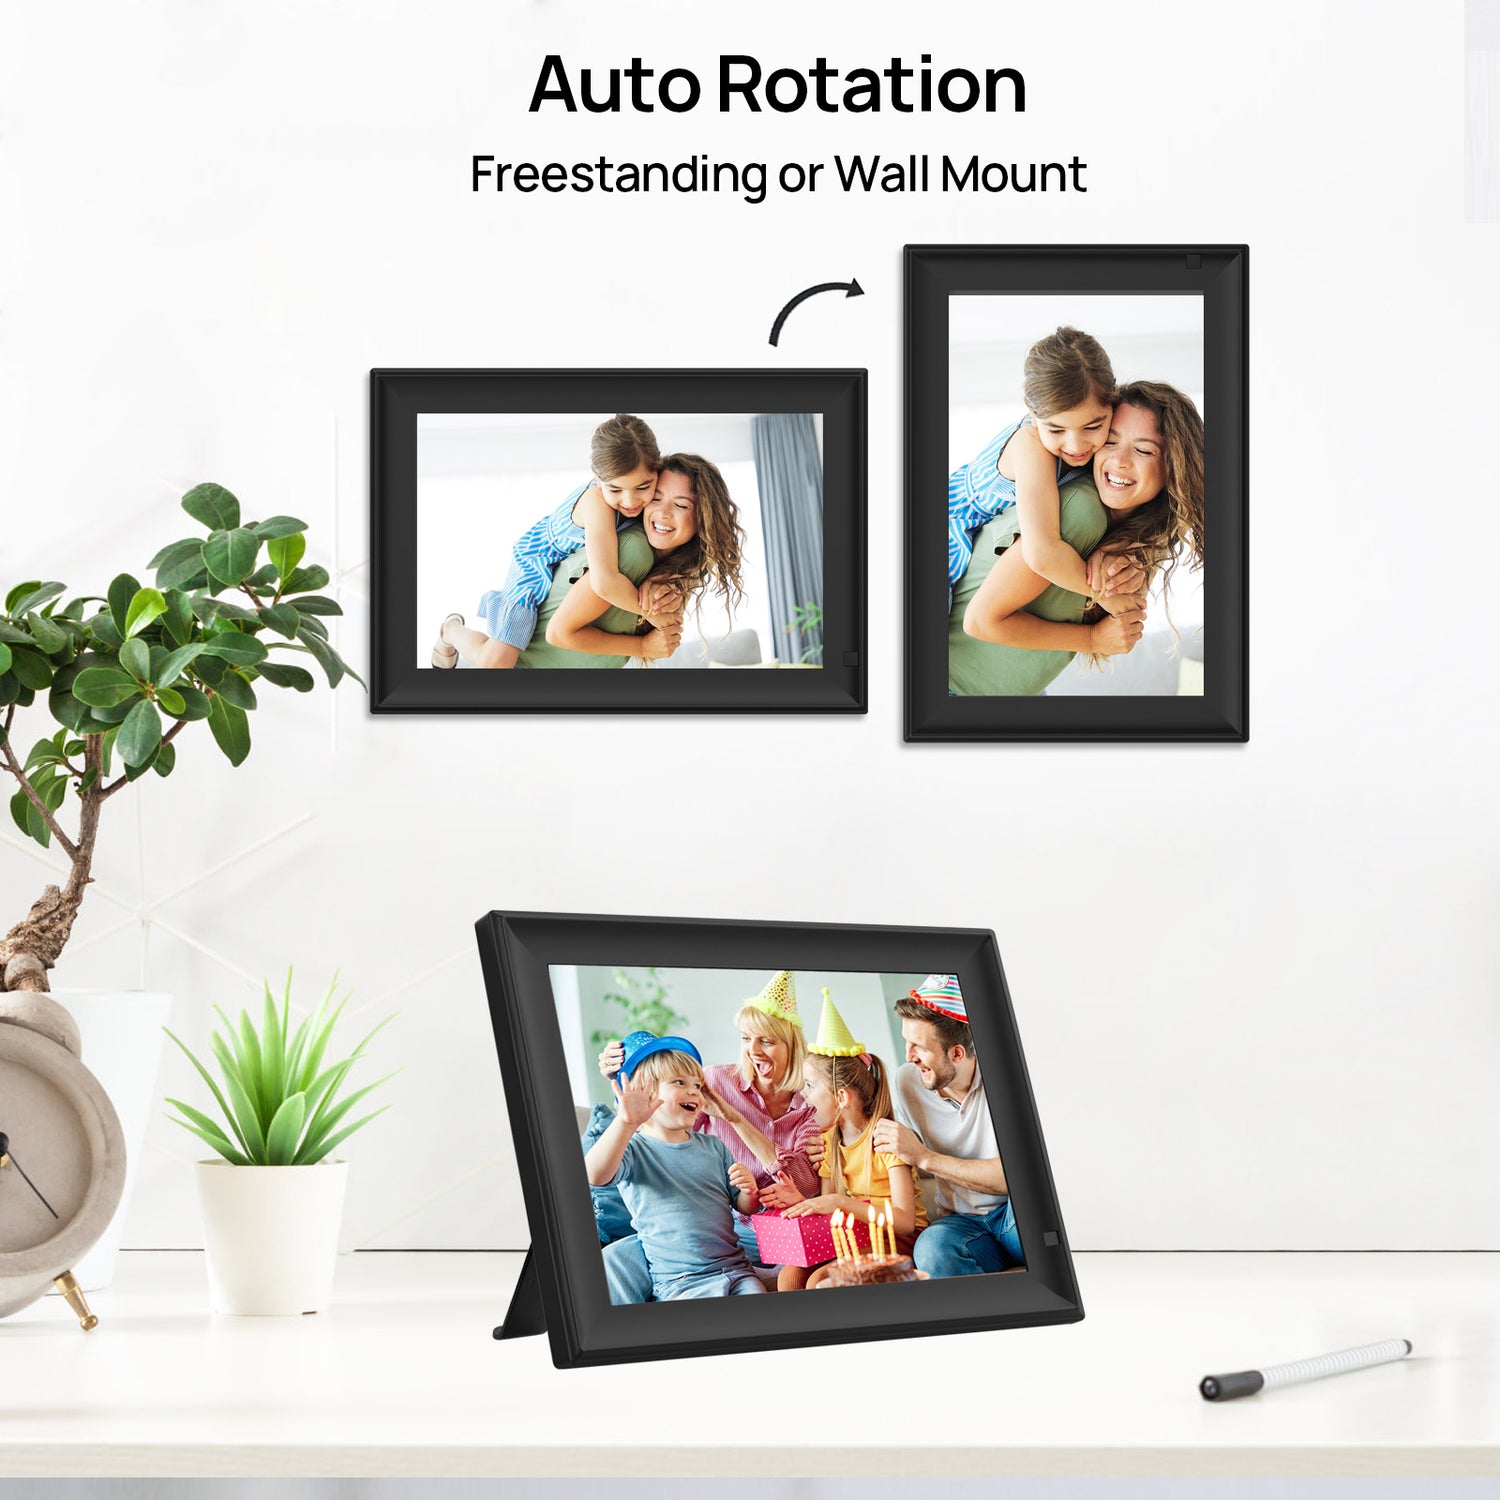 UK Technology Motion Detection Black WiFi Digital Photo Frame hung up on a wall in landscape and portrait showing auto rotate